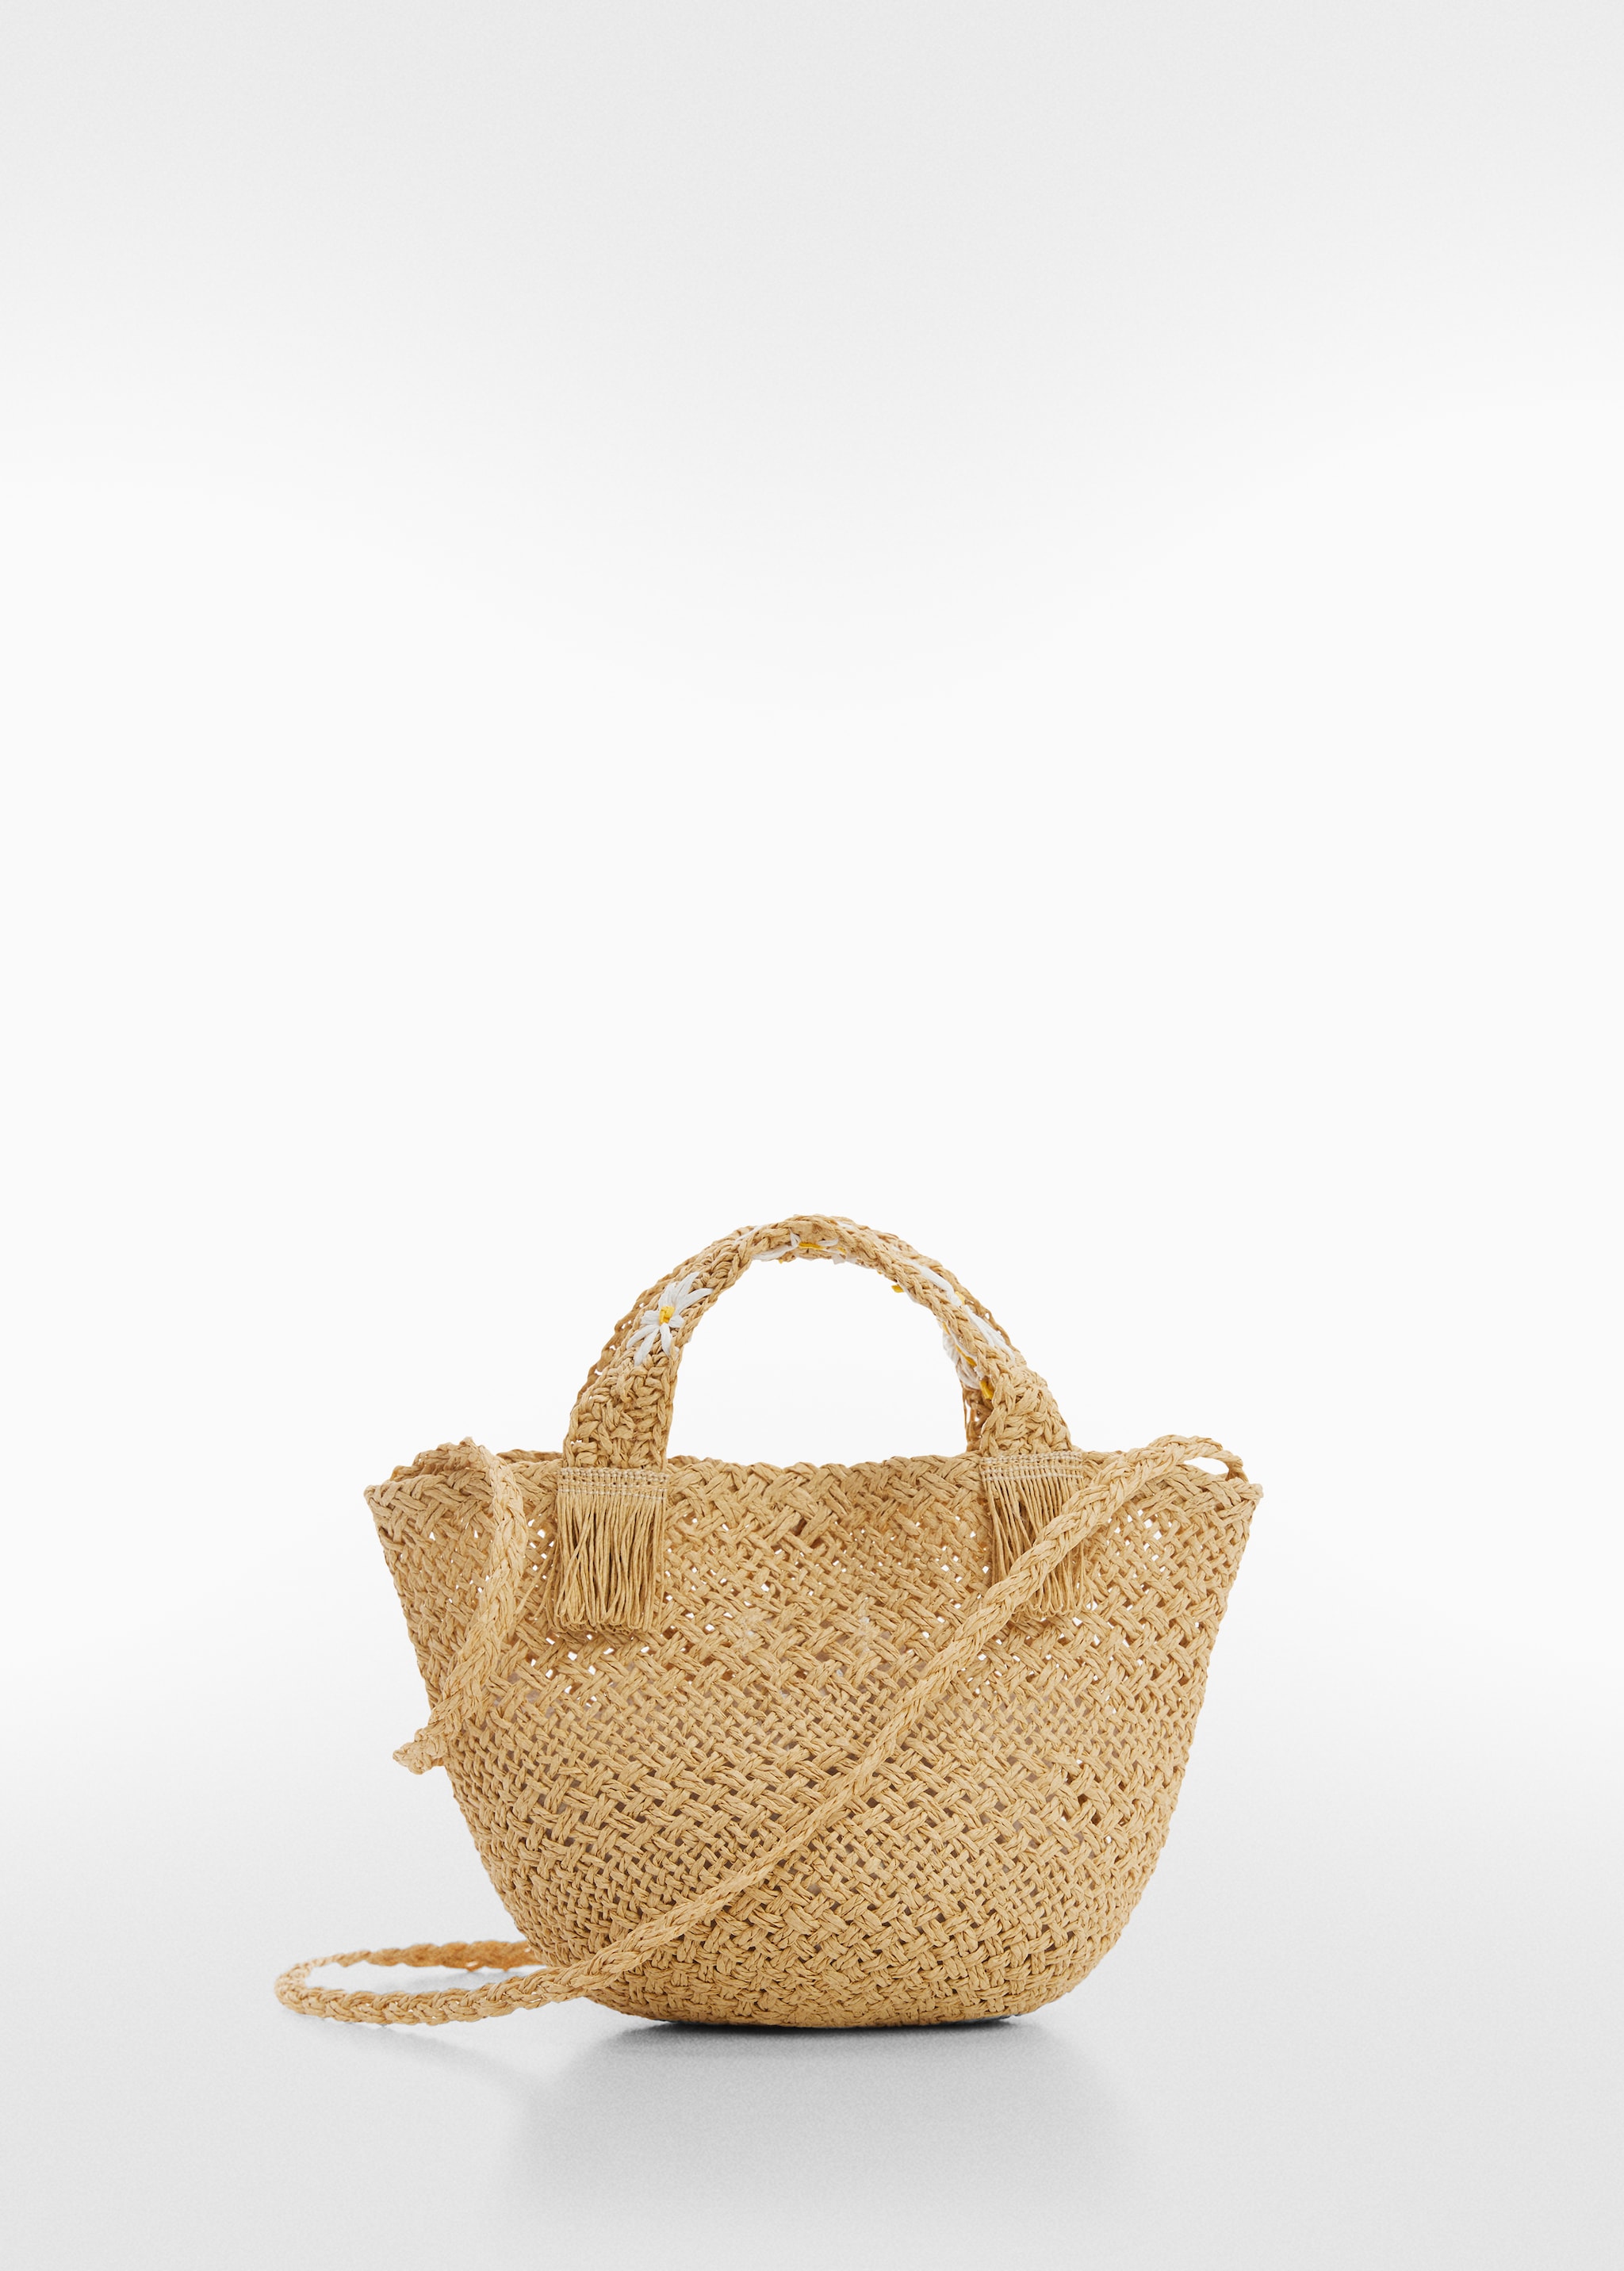 Straw bag - Article without model